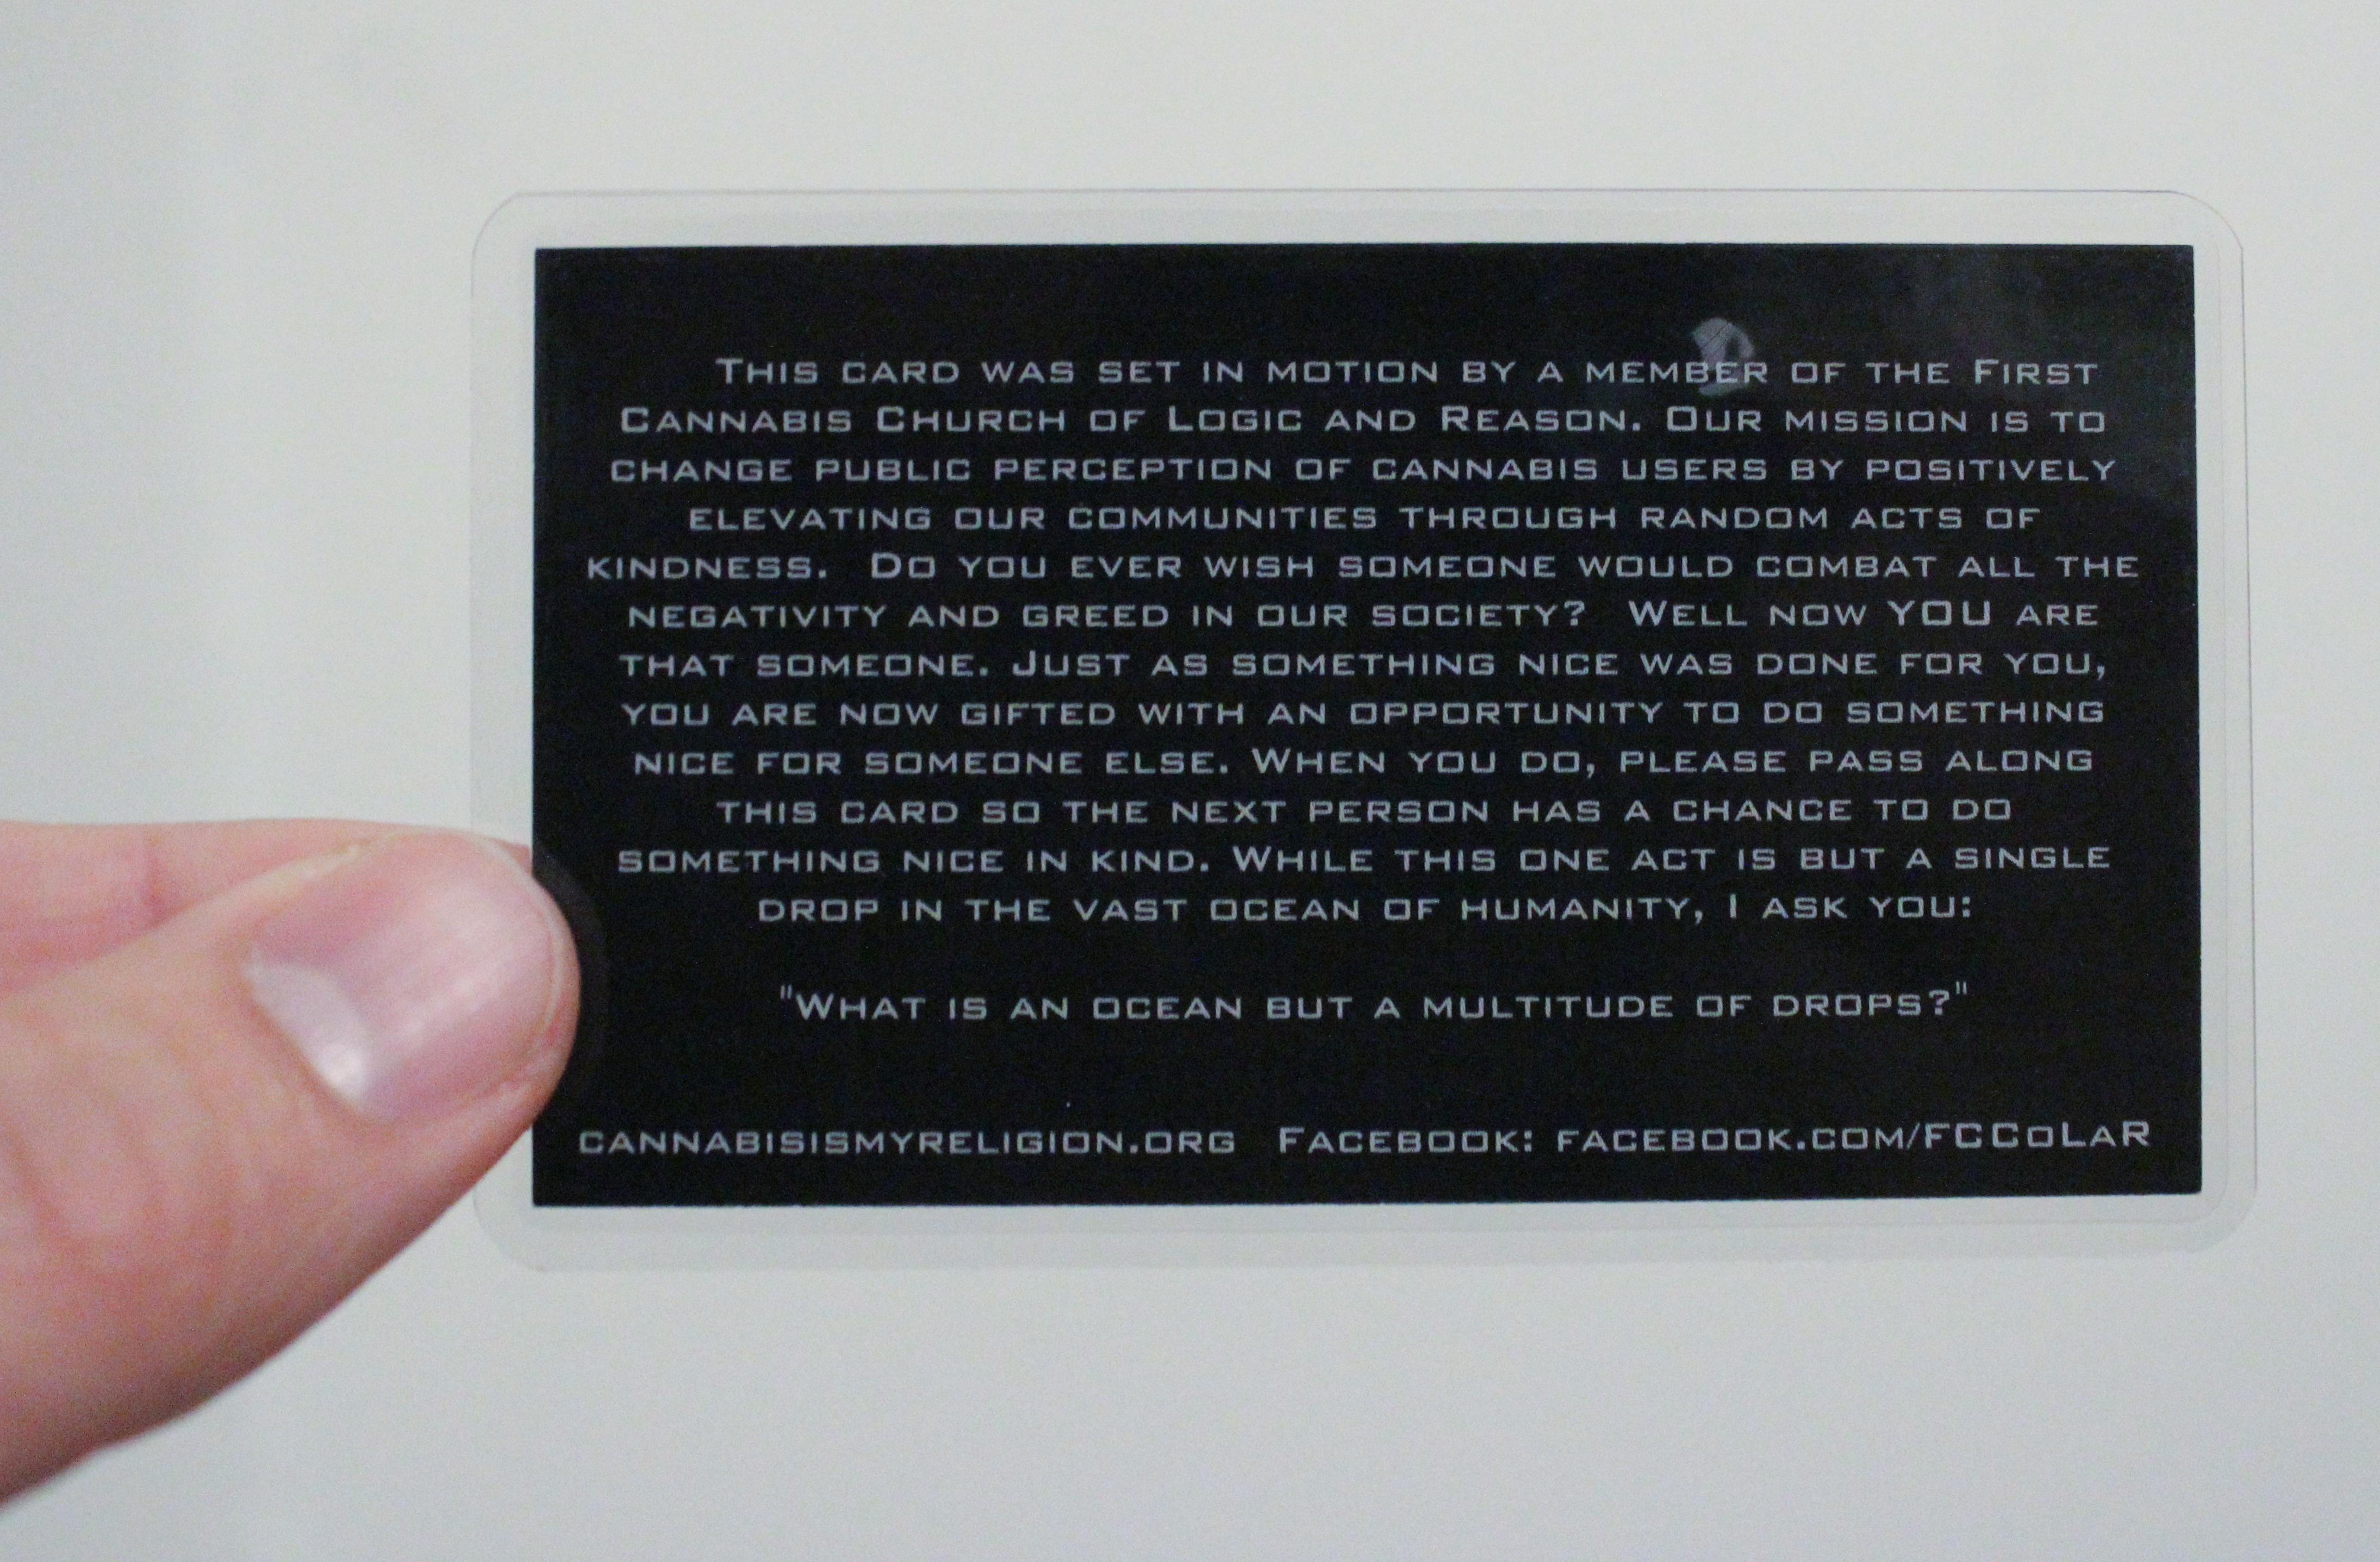 The back of a First Cannabis Church card details the mission of the organization’s pay-it-forward campaign.